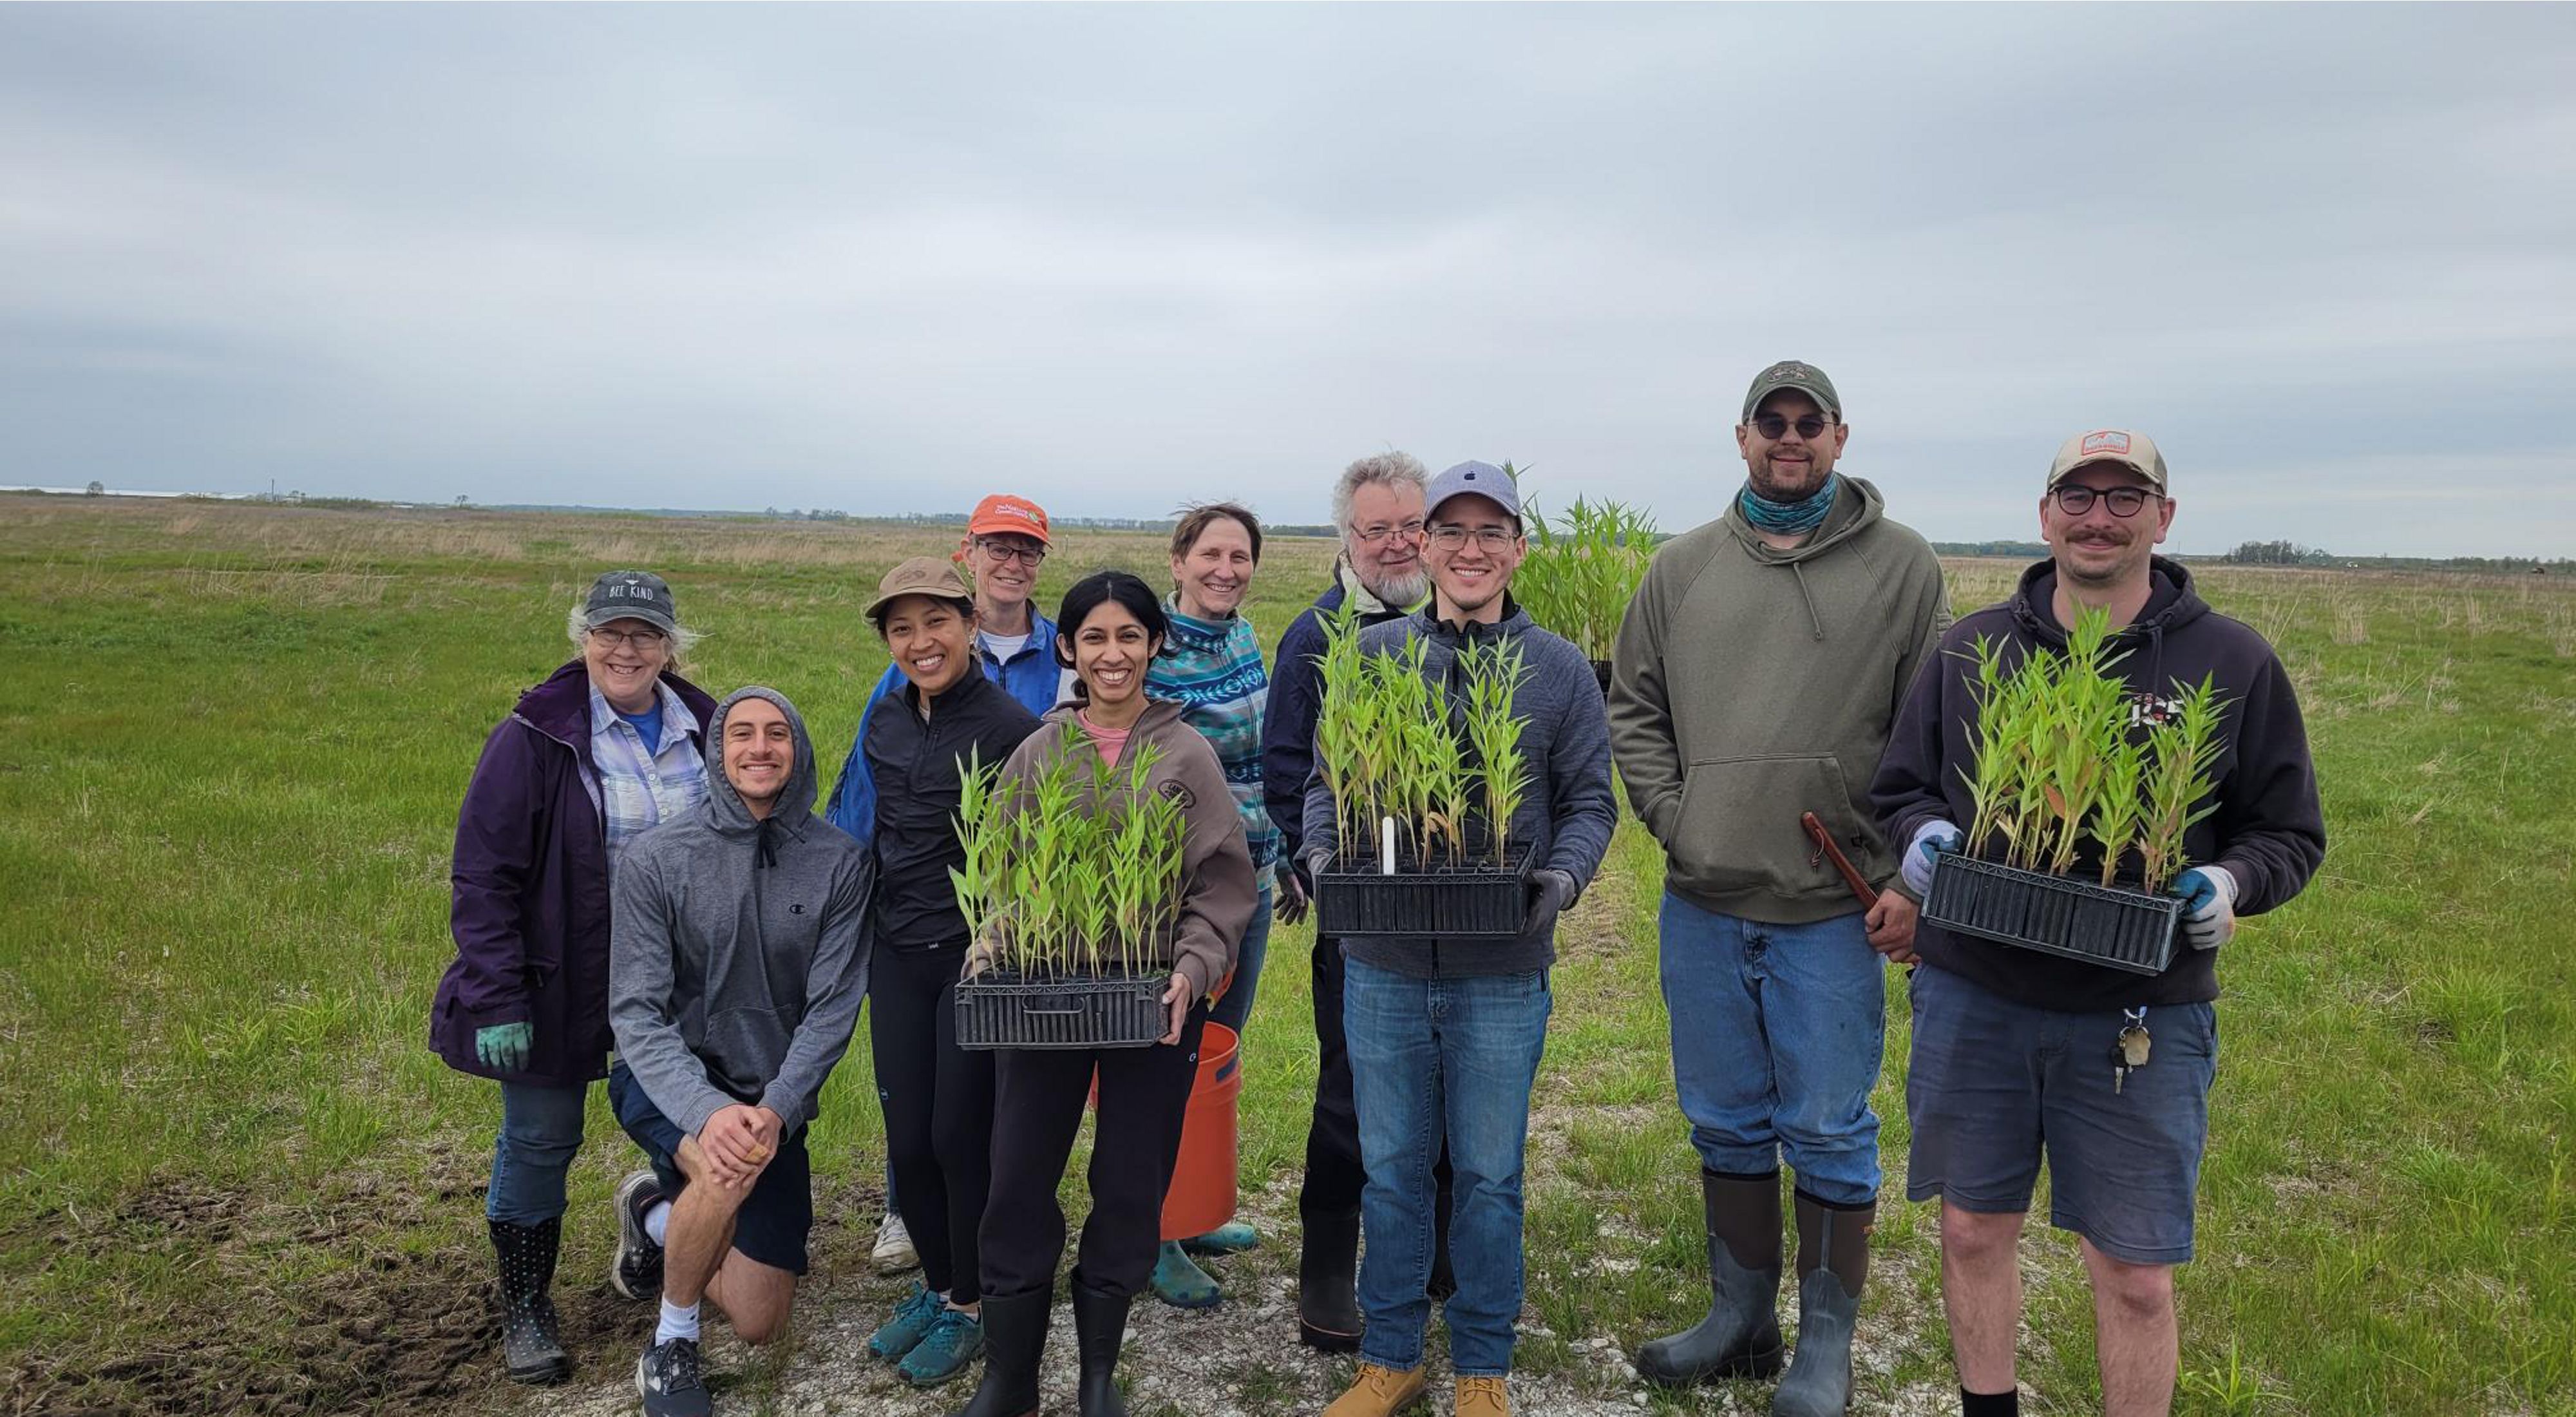 A group of volunteers holding flat containers of small plants pose together on the Kankakee Sands prairie.